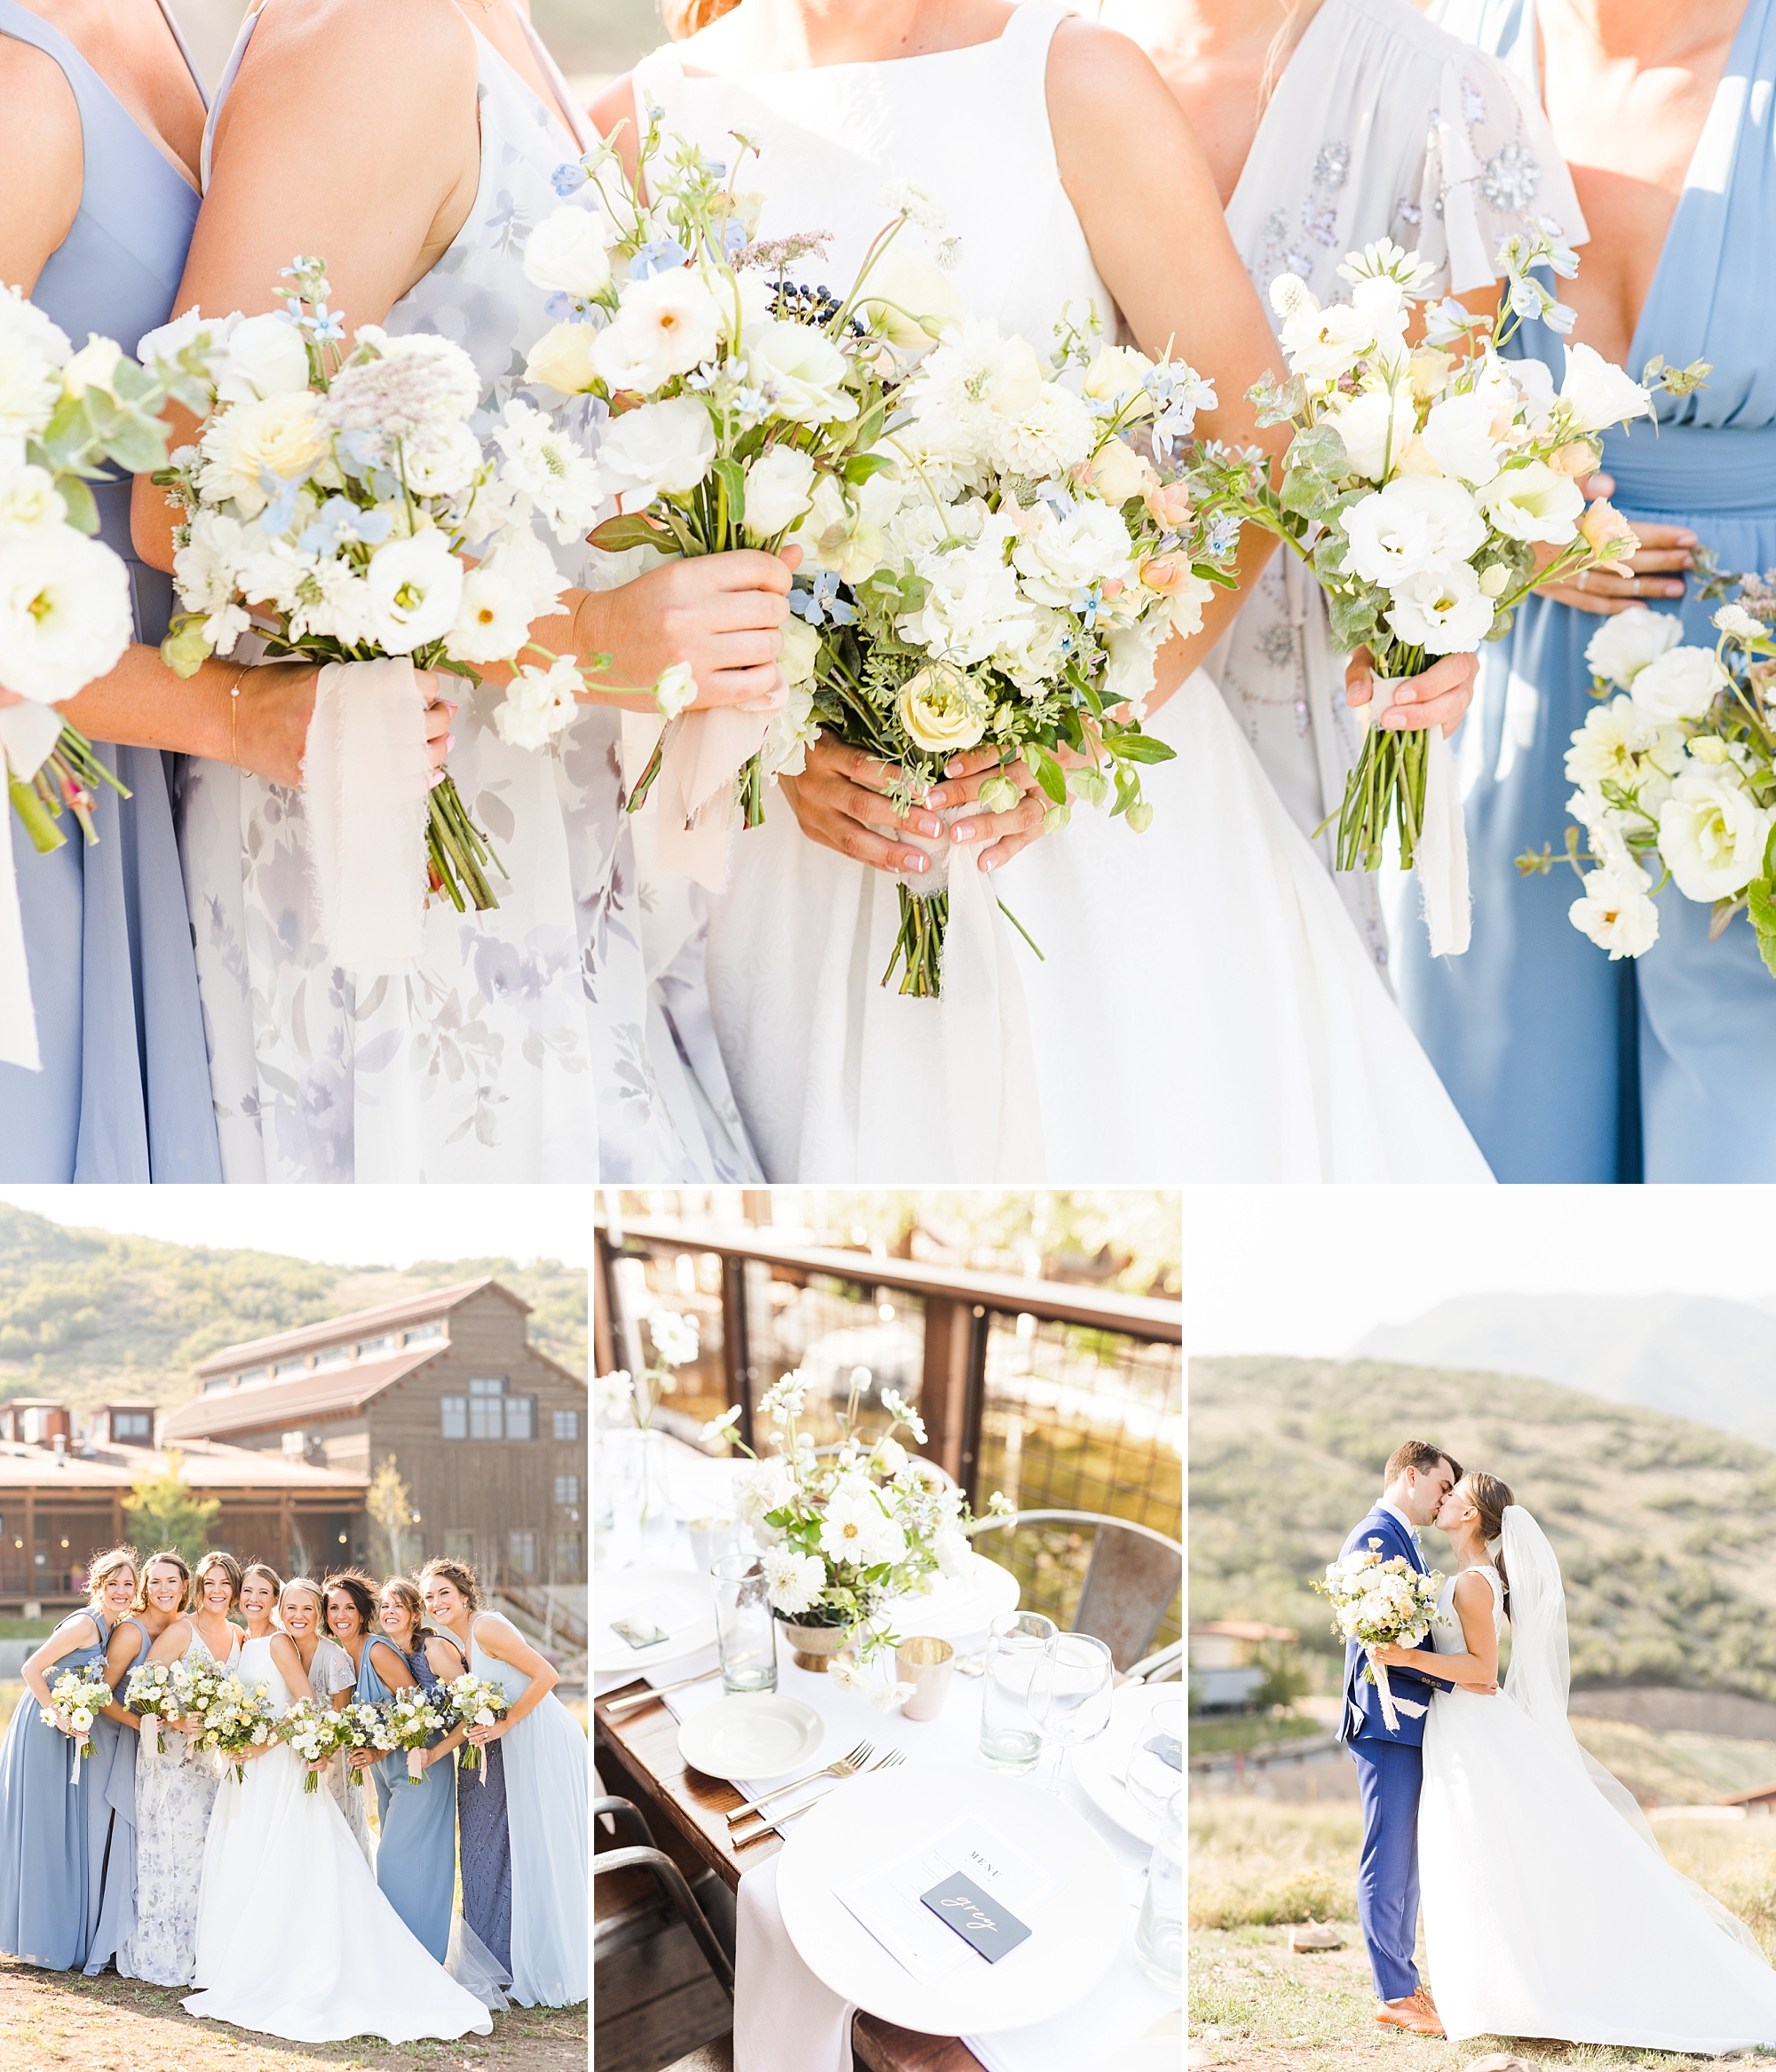 With whimsical bouquets and soft blues, The Lodge at Blue Sky in Park City, Utah was the perfect setting for this summer destination wedding. 